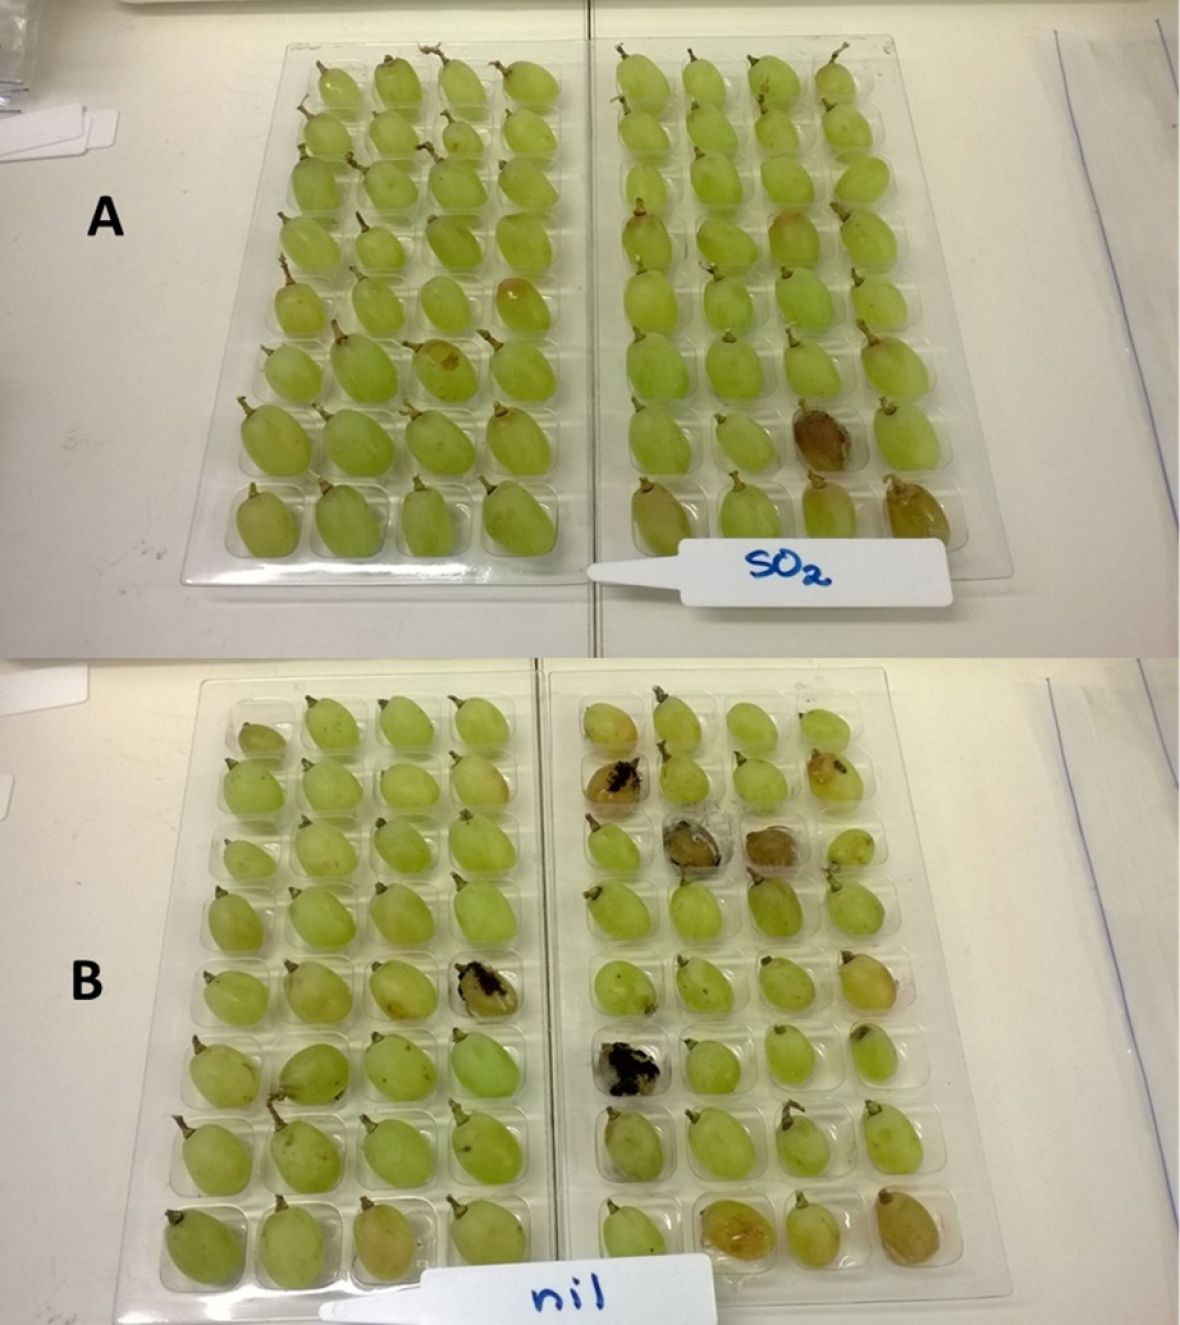 Table grapes on assessment trays comparing SO2 and nil chemical applications 